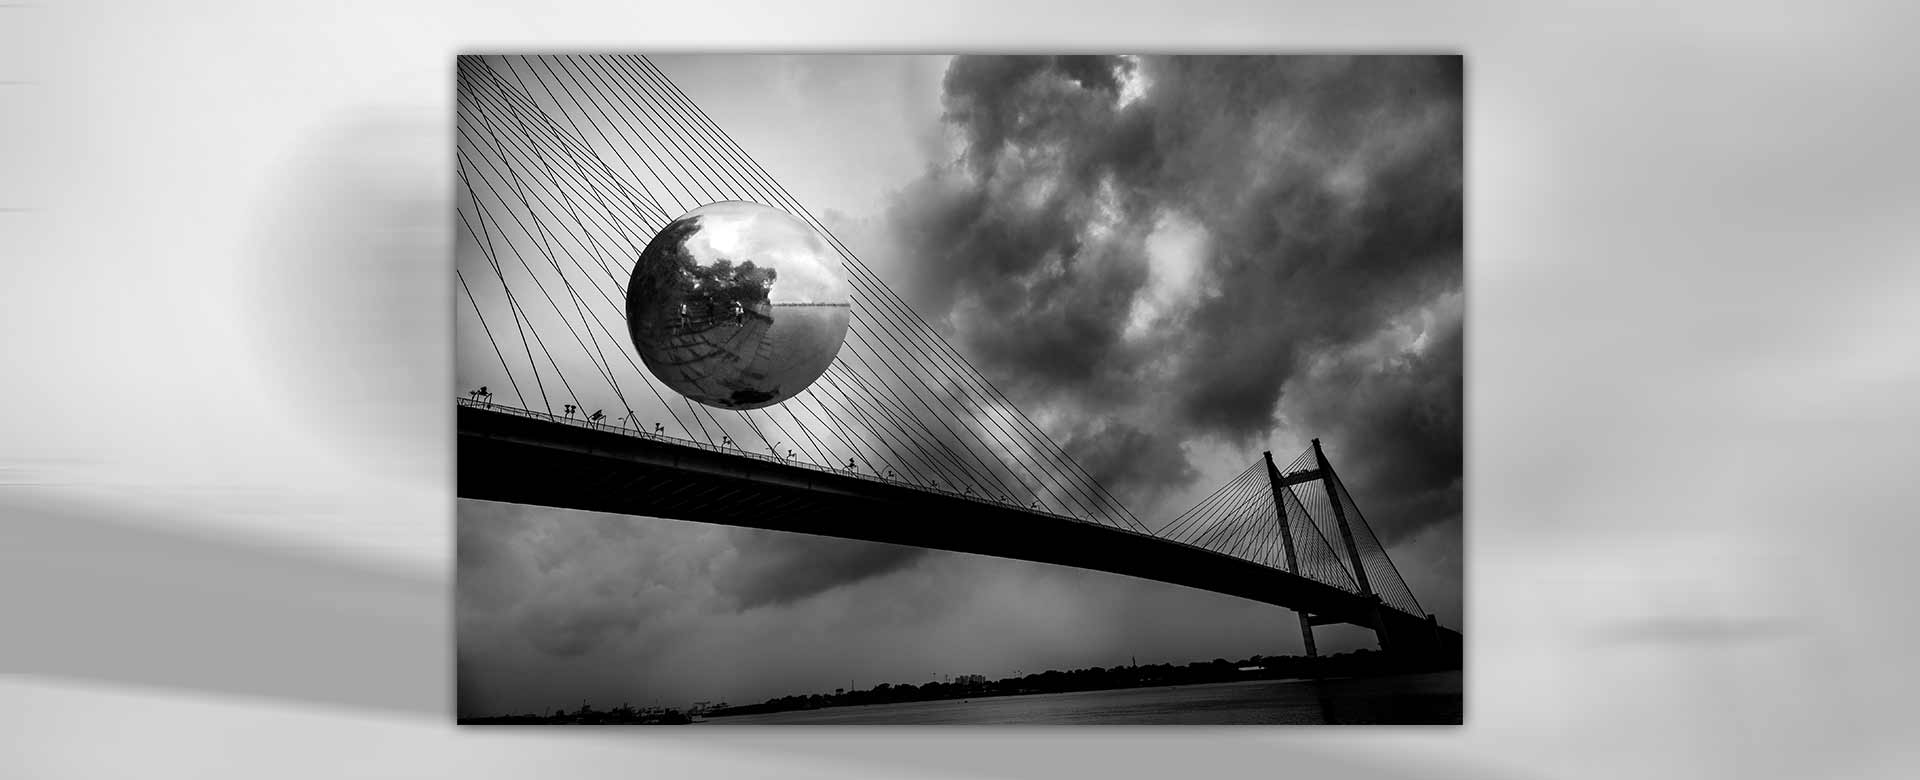 Max Vadukul, SecondHooghly Bridge, from the series The Witness, Kolkata (India), 2019